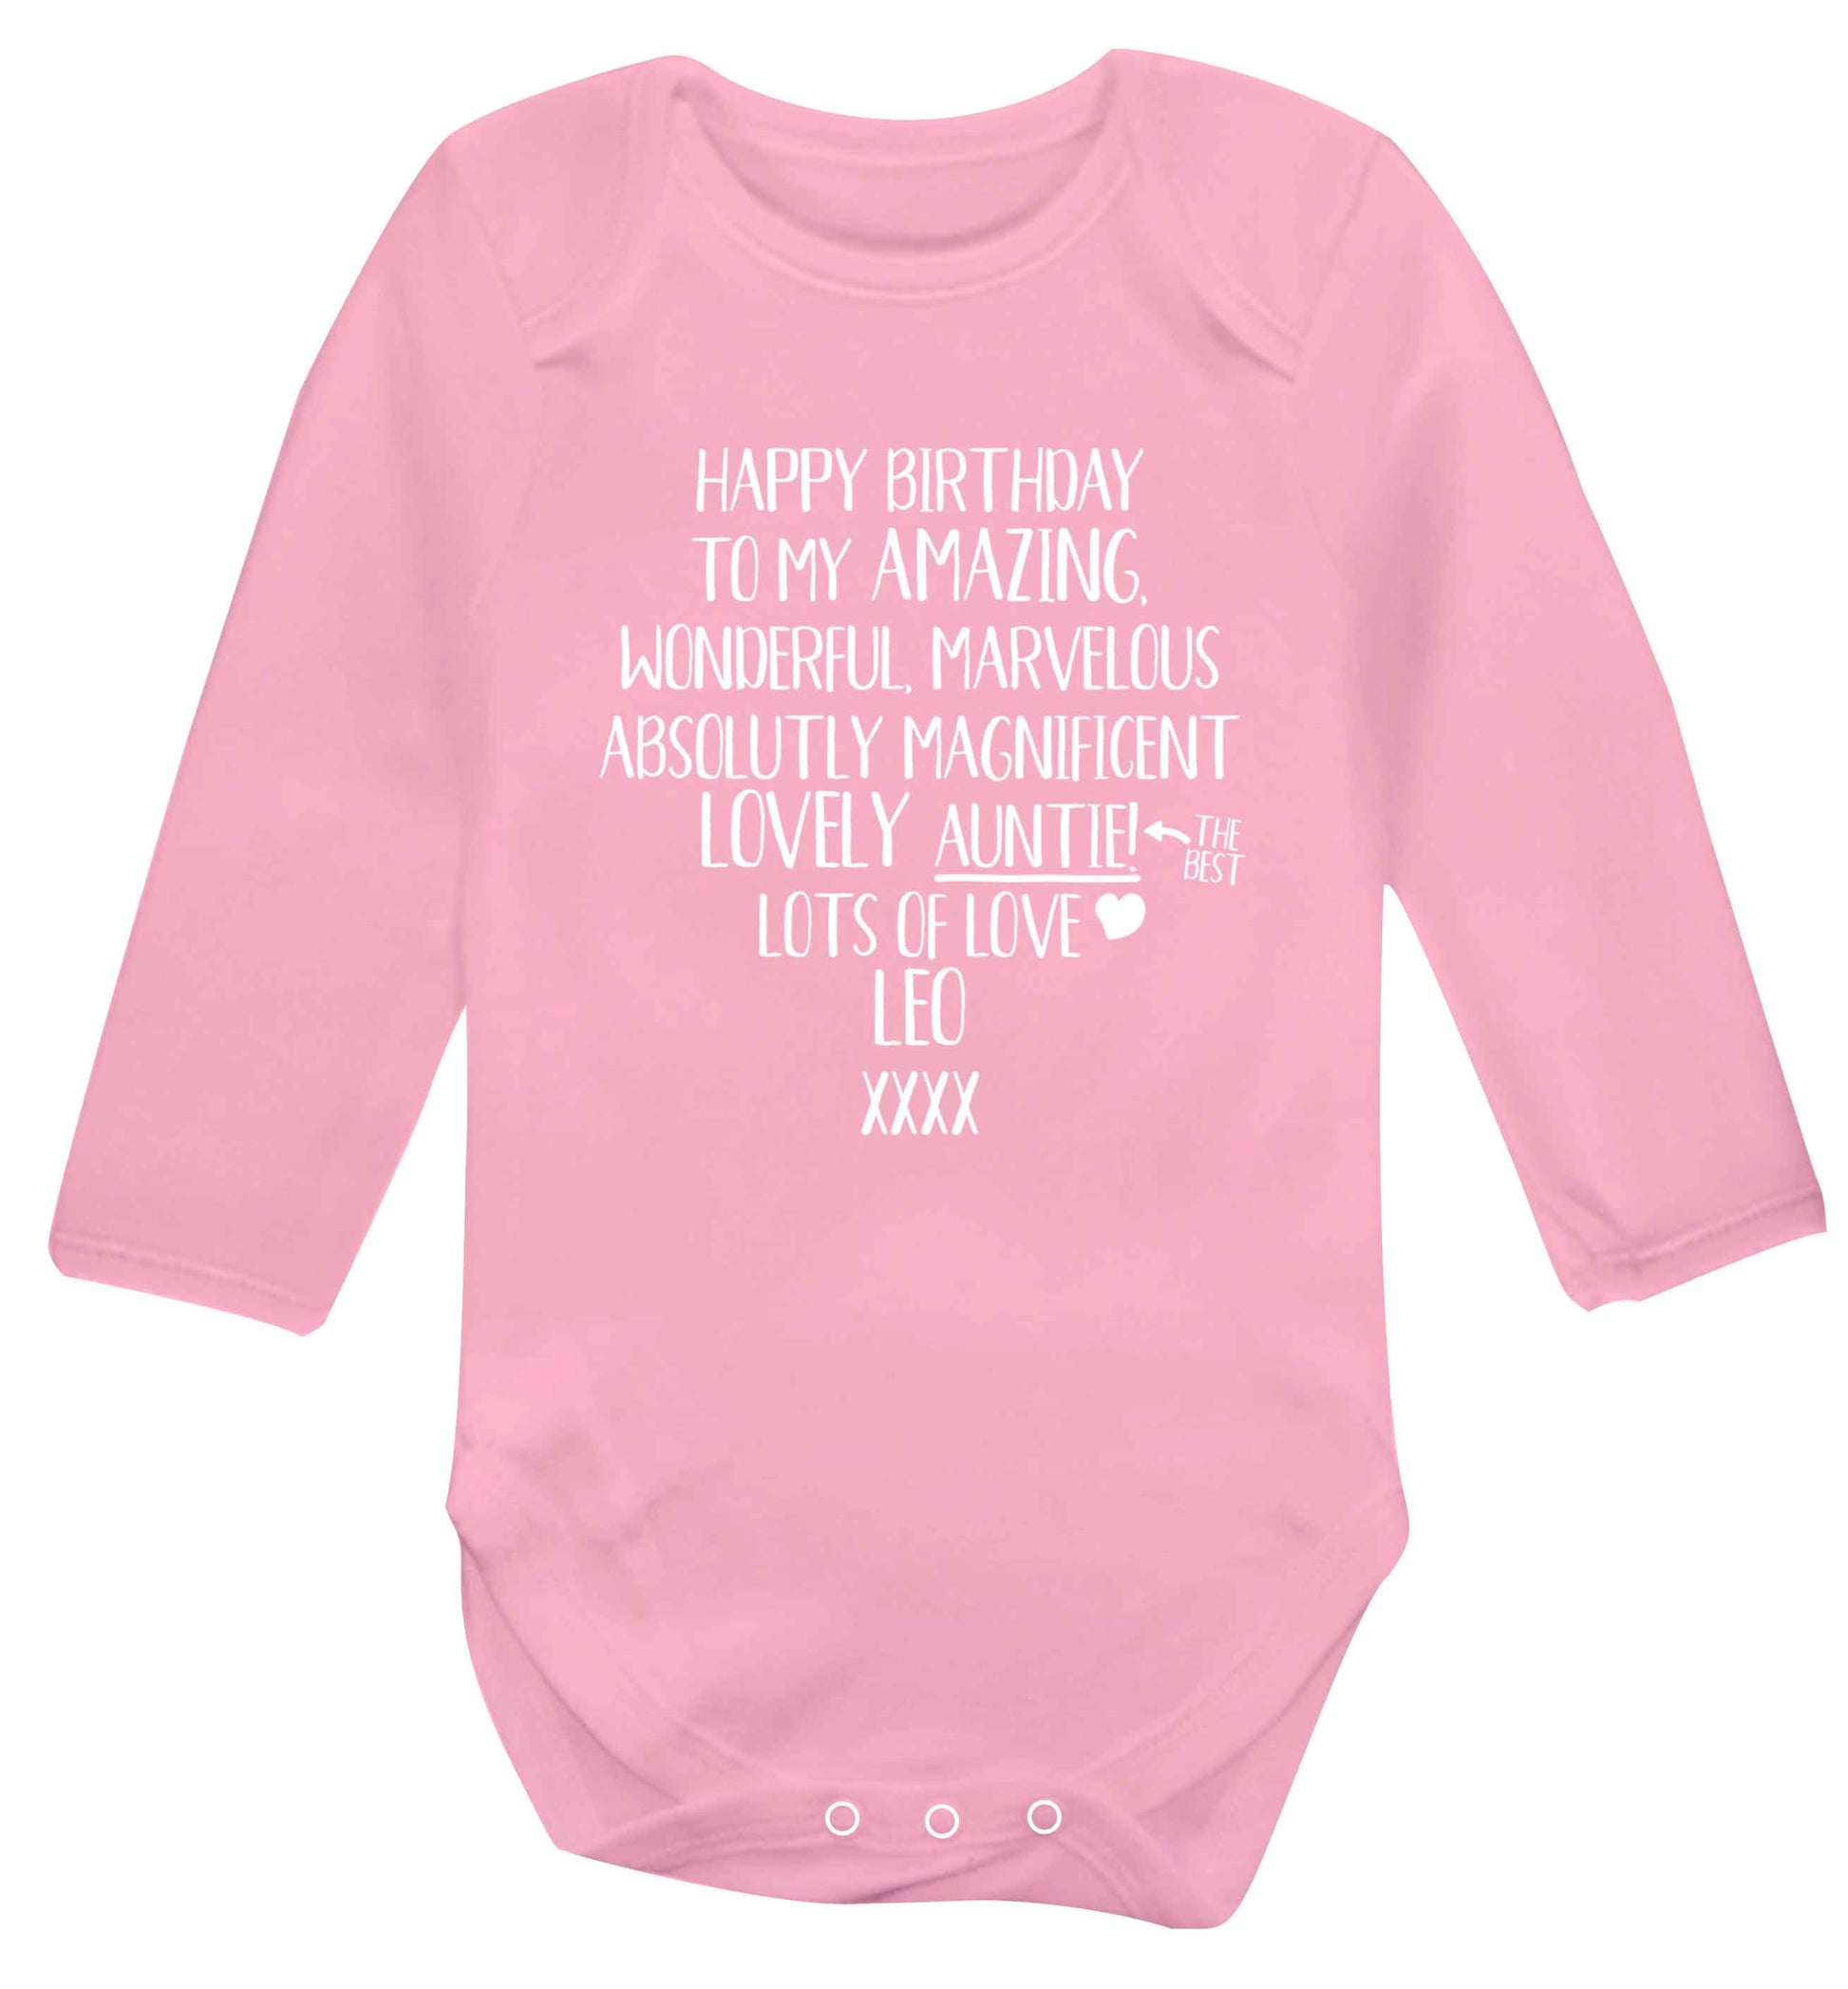 Personalised happy birthday to my amazing, wonderful, lovely auntie Baby Vest long sleeved pale pink 6-12 months